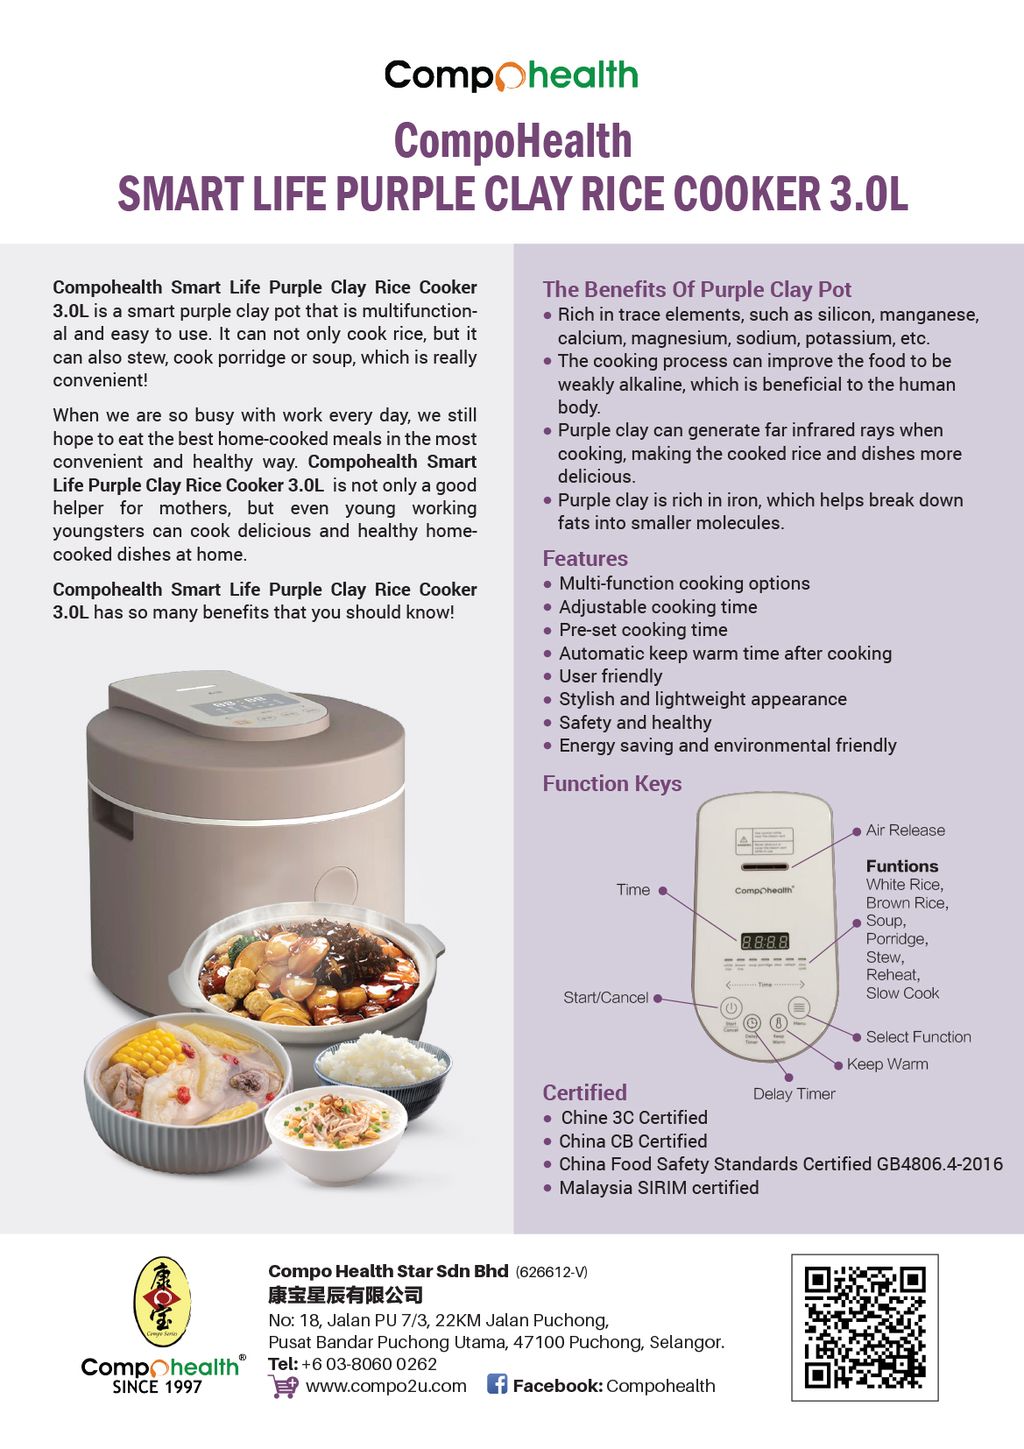 A5 Leaflet_Smart Life Purple Clay Rice Cooker 3.0L_English (1)